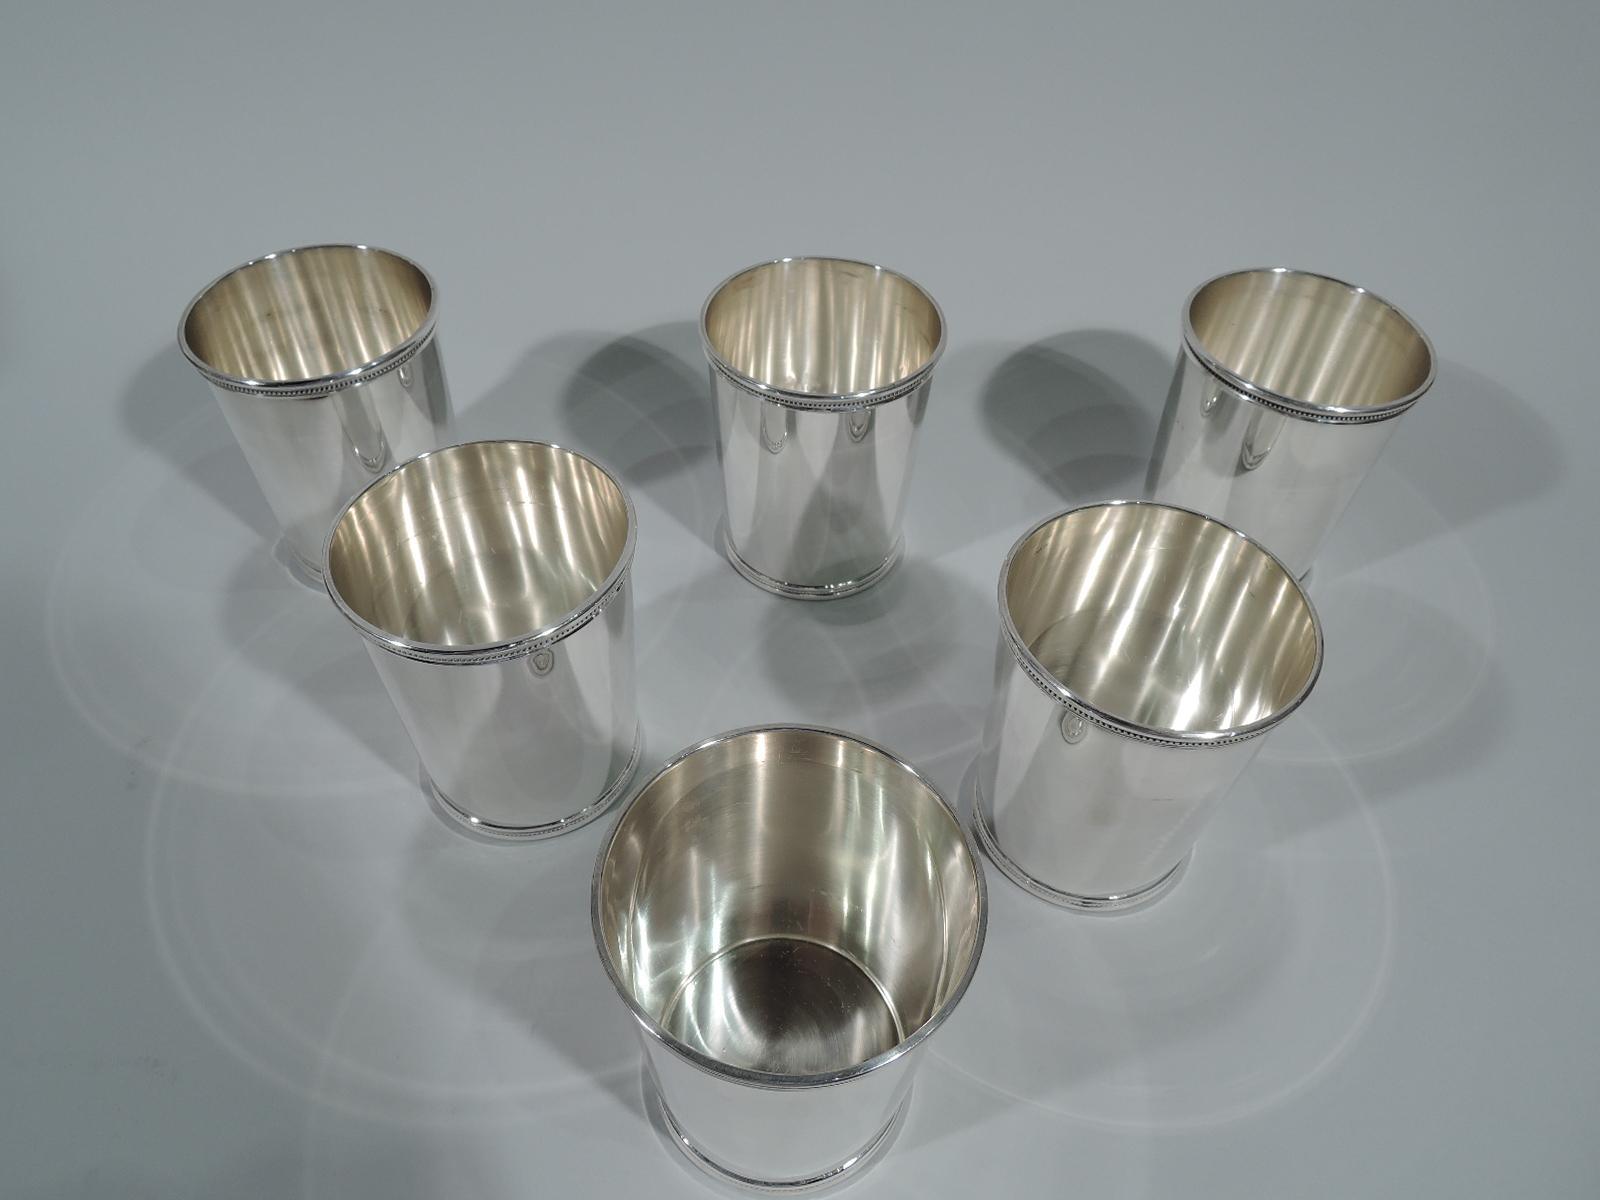 Set of six sterling silver mint julep cups. Retailed by Scearce in Shelbyville, Kentucky. Each: Straight and tapering sides and beaded and molded rims. Fully marked including presidential date code DDE for Dwight David Eisenhower, who was in office